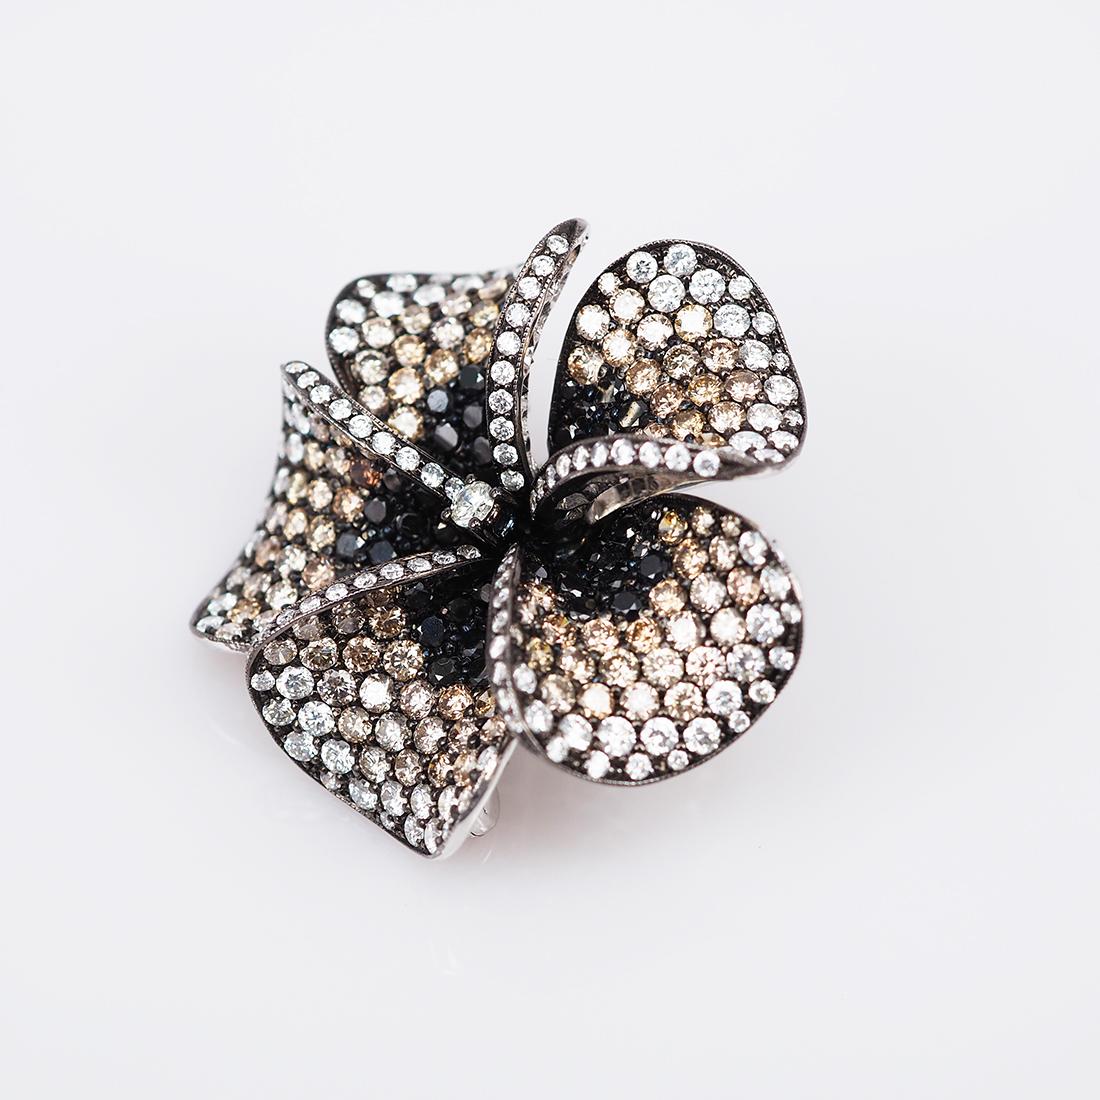 Diamond brooch and pendant .You can use as 2 ways.We design as the motive of nice leelavadee flower.We shade color of diamond form black,brown and white diamond .To make it look soft and nice.Diamond use 8.09 ct the setting made in 18k White gold.It